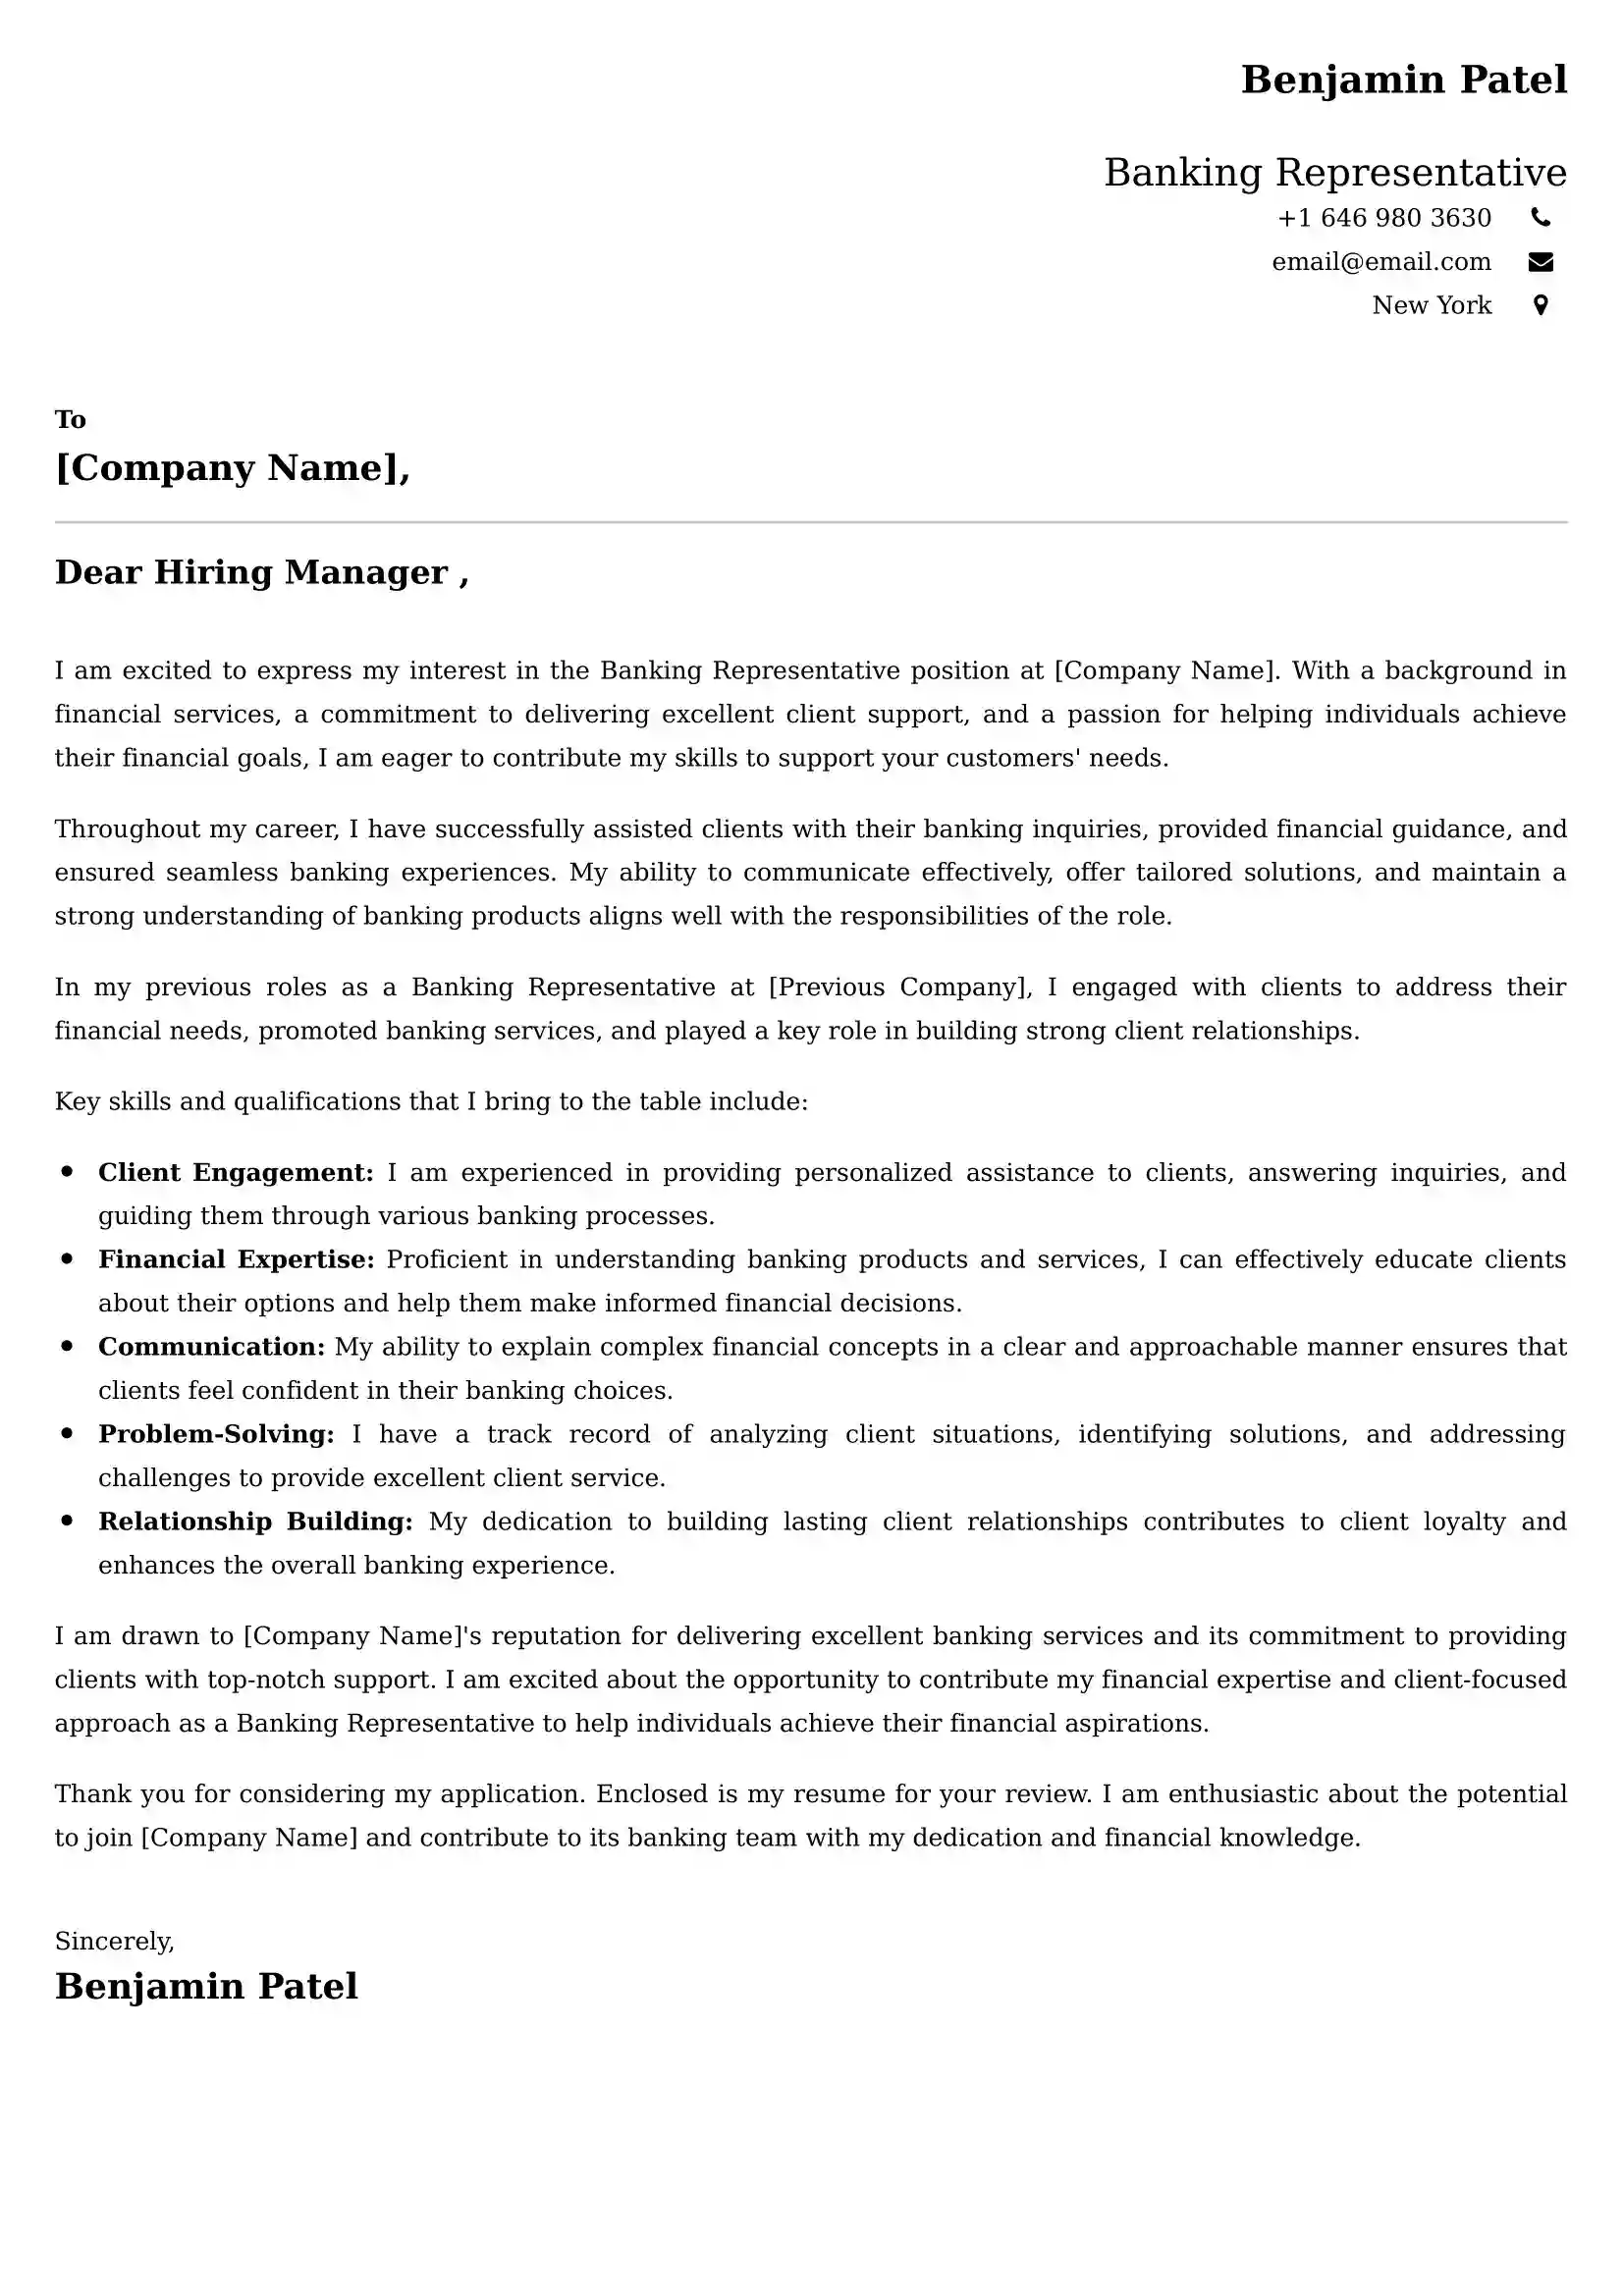 Banking Representative Cover Letter Examples - US Format and Tips